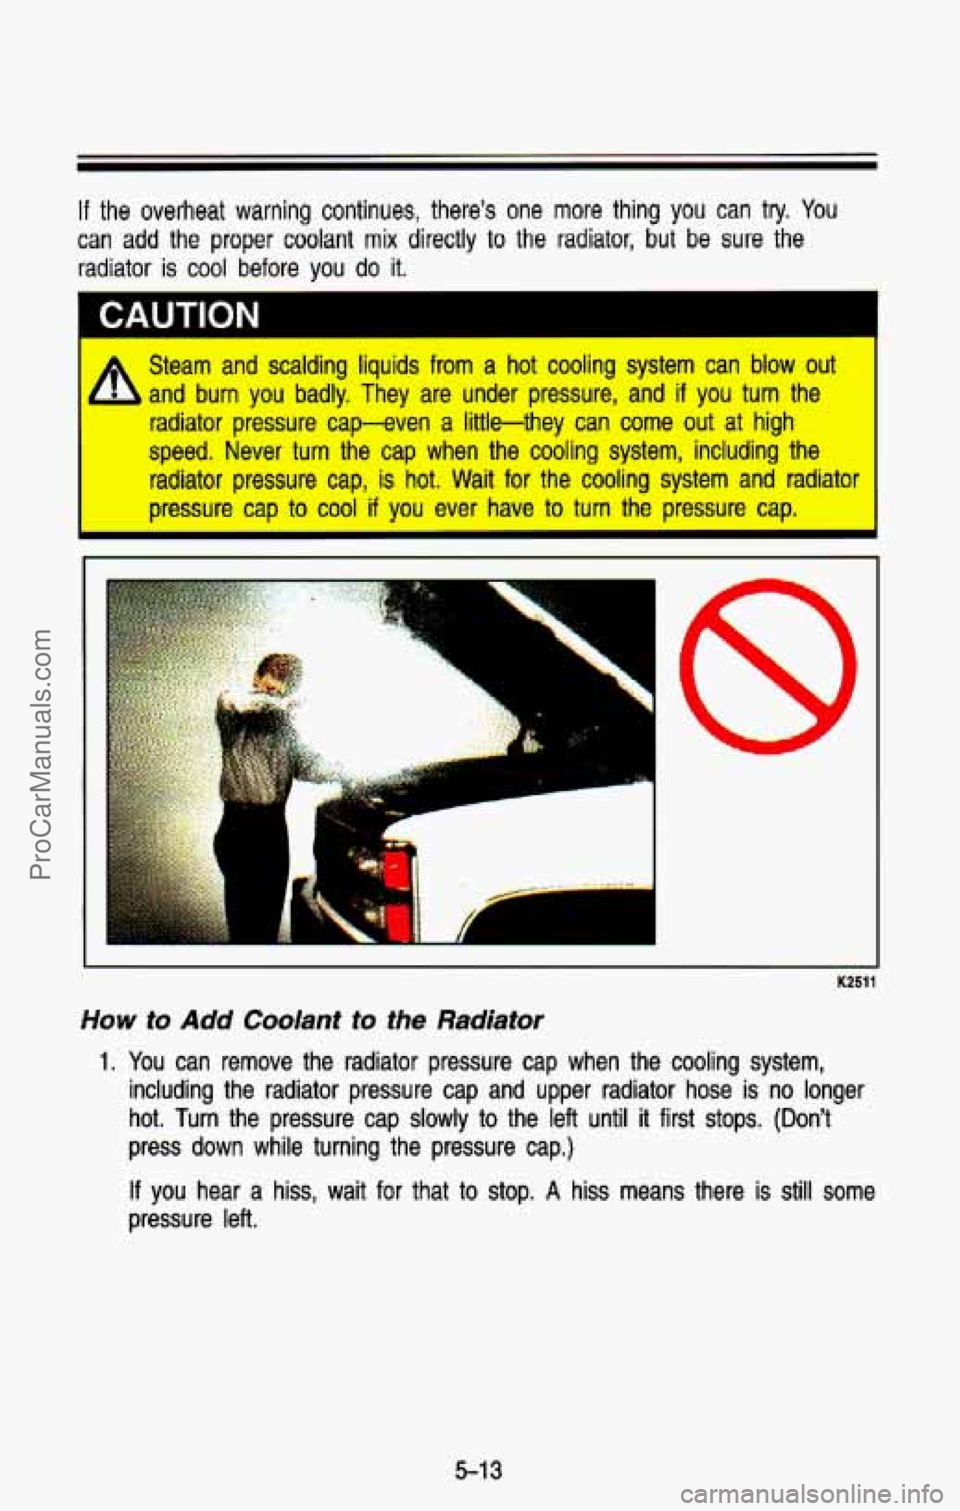 CHEVROLET SUBURBAN 1993  Owners Manual If the overheat  warning  continues,  theres  one more thing  you can  try. You 
can add  the  proper  coolant mix directly to the  radiator,  but be sure  the 
radiator  is cool  before  you 
do it.